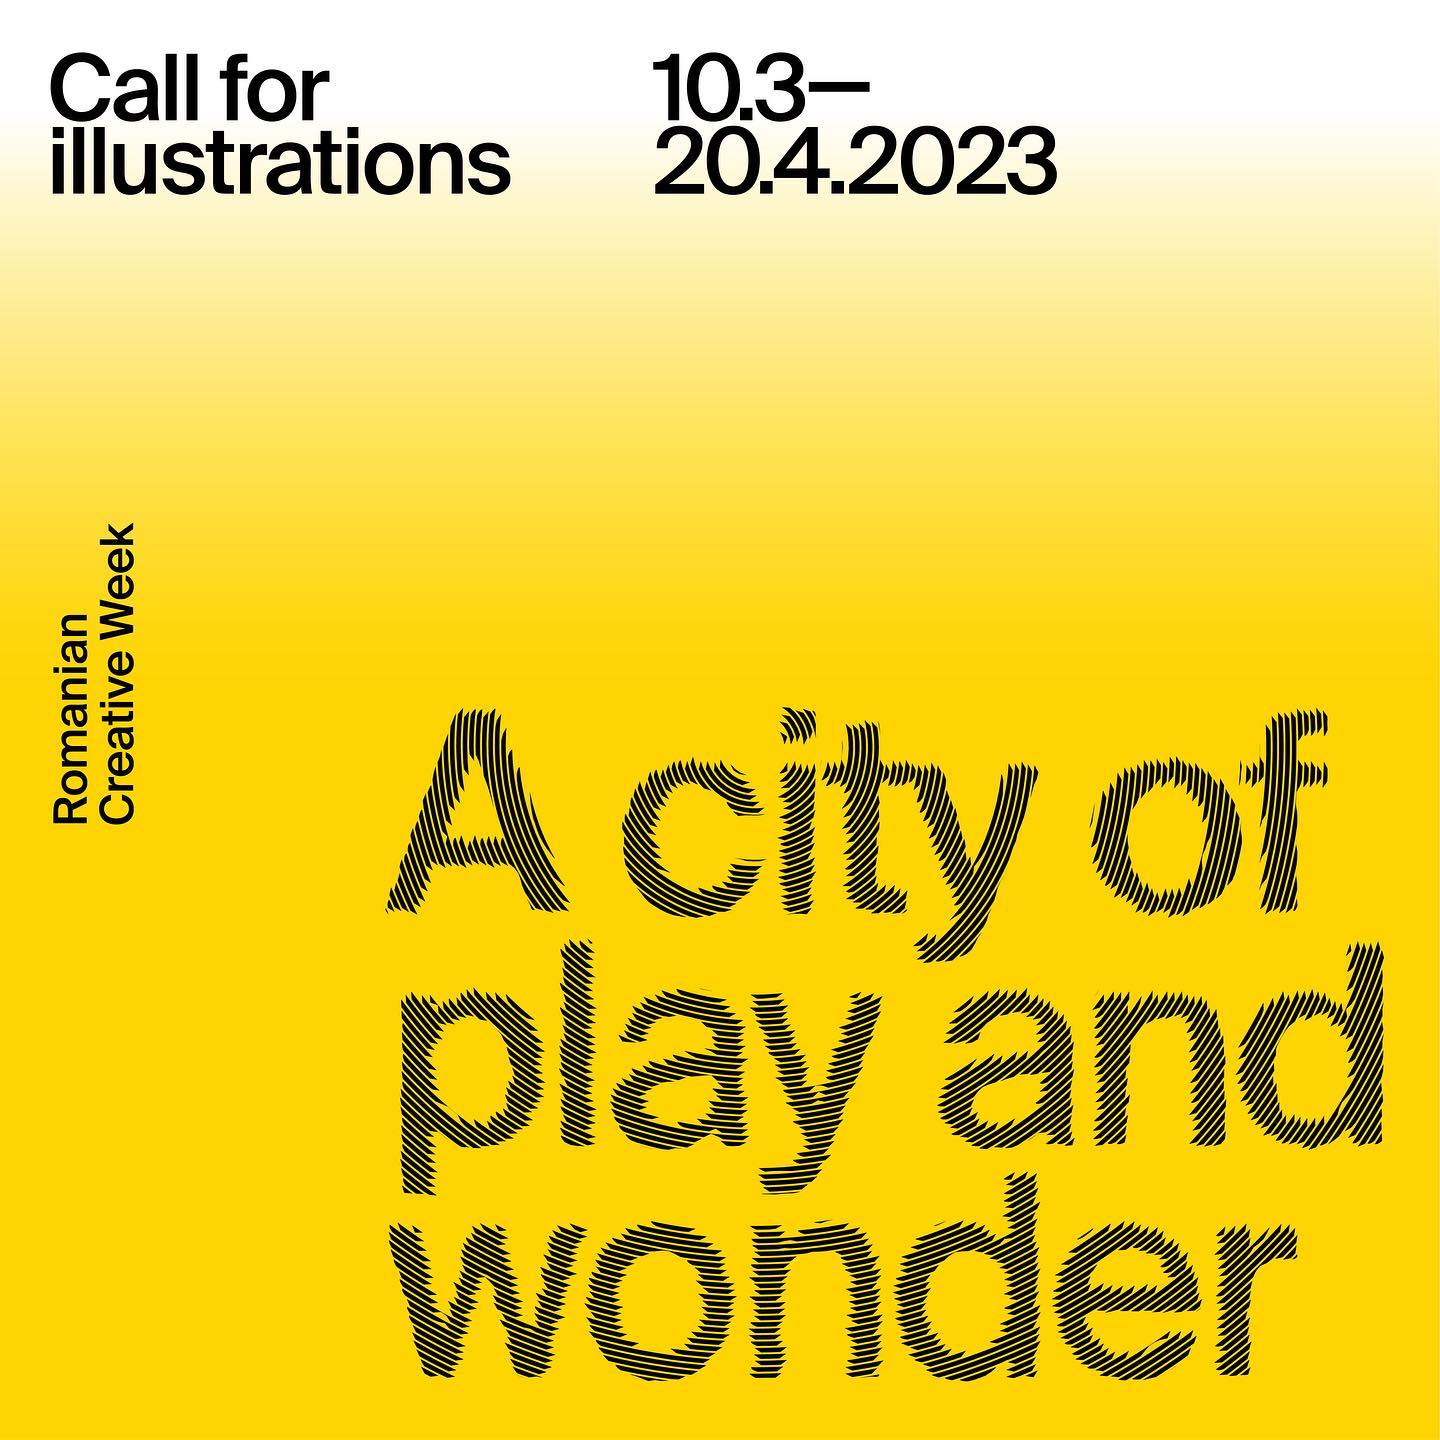 Call for illustrations: A city of play and wonder